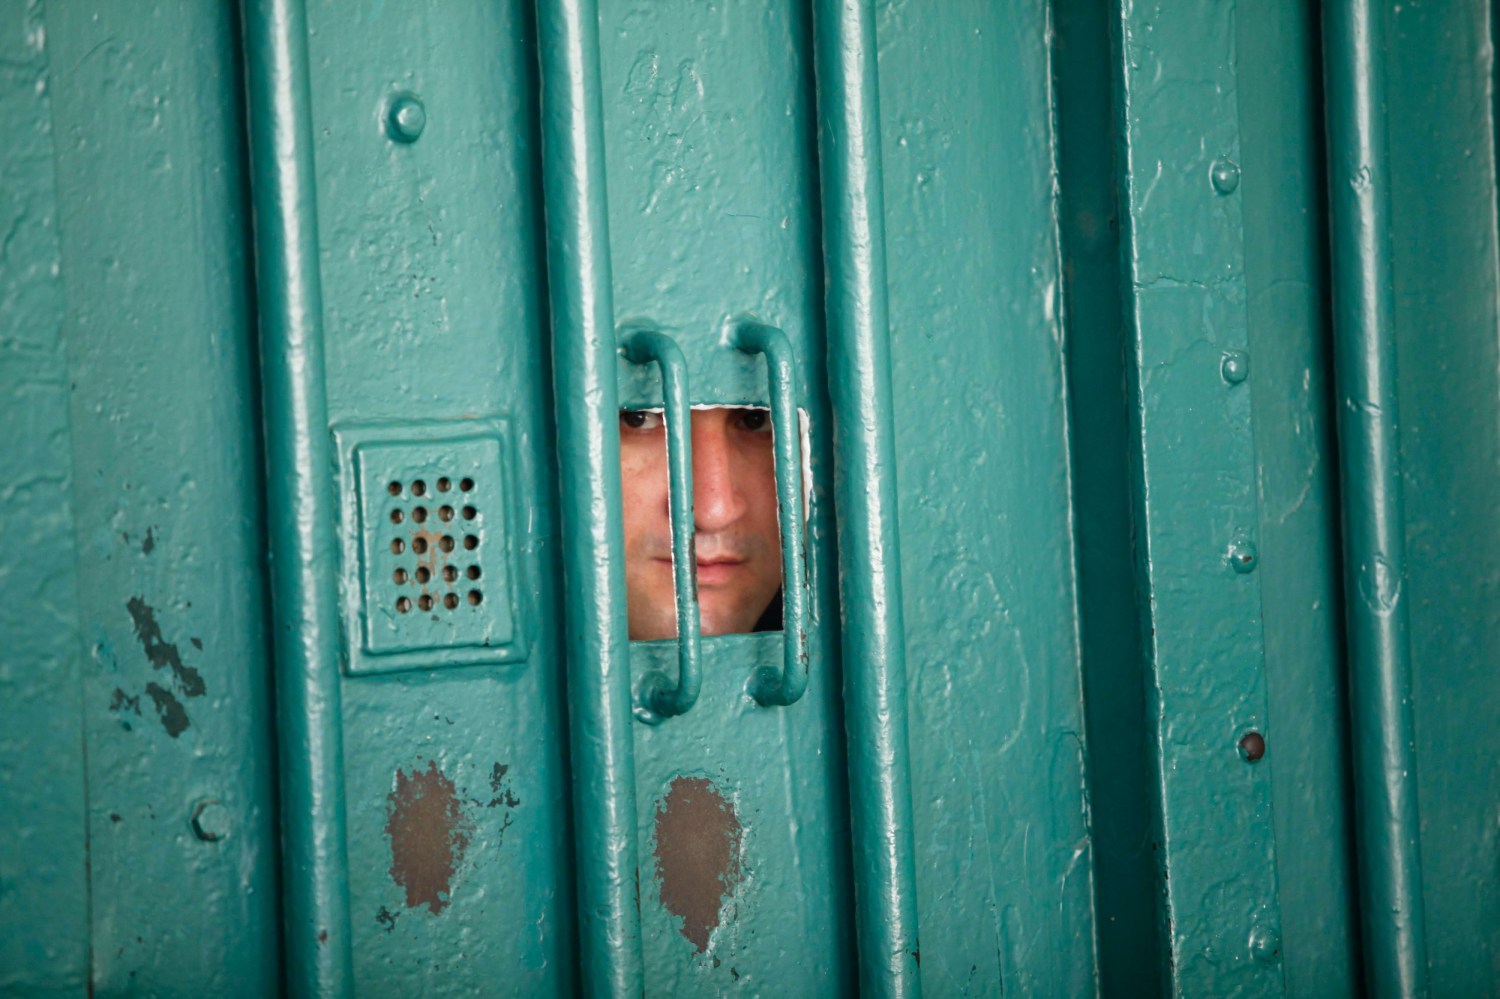 A prison guard looks through a small window at the El Harrach prison in Algiers July 14, 2010. Algeria is ready to open its prisons to international inspection to counter allegations that inmates are abused, Farouk Ksentini, chairman of the National Consultative Commission for the Promotion and Protection of Human Rights, a government-backed human rights body, said on Wednesday.       To match Interview ALGERIA-PRISONS/     REUTERS/Louafi Larbi (ALGERIA - Tags: CRIME LAW) - GM1E67F02LF01